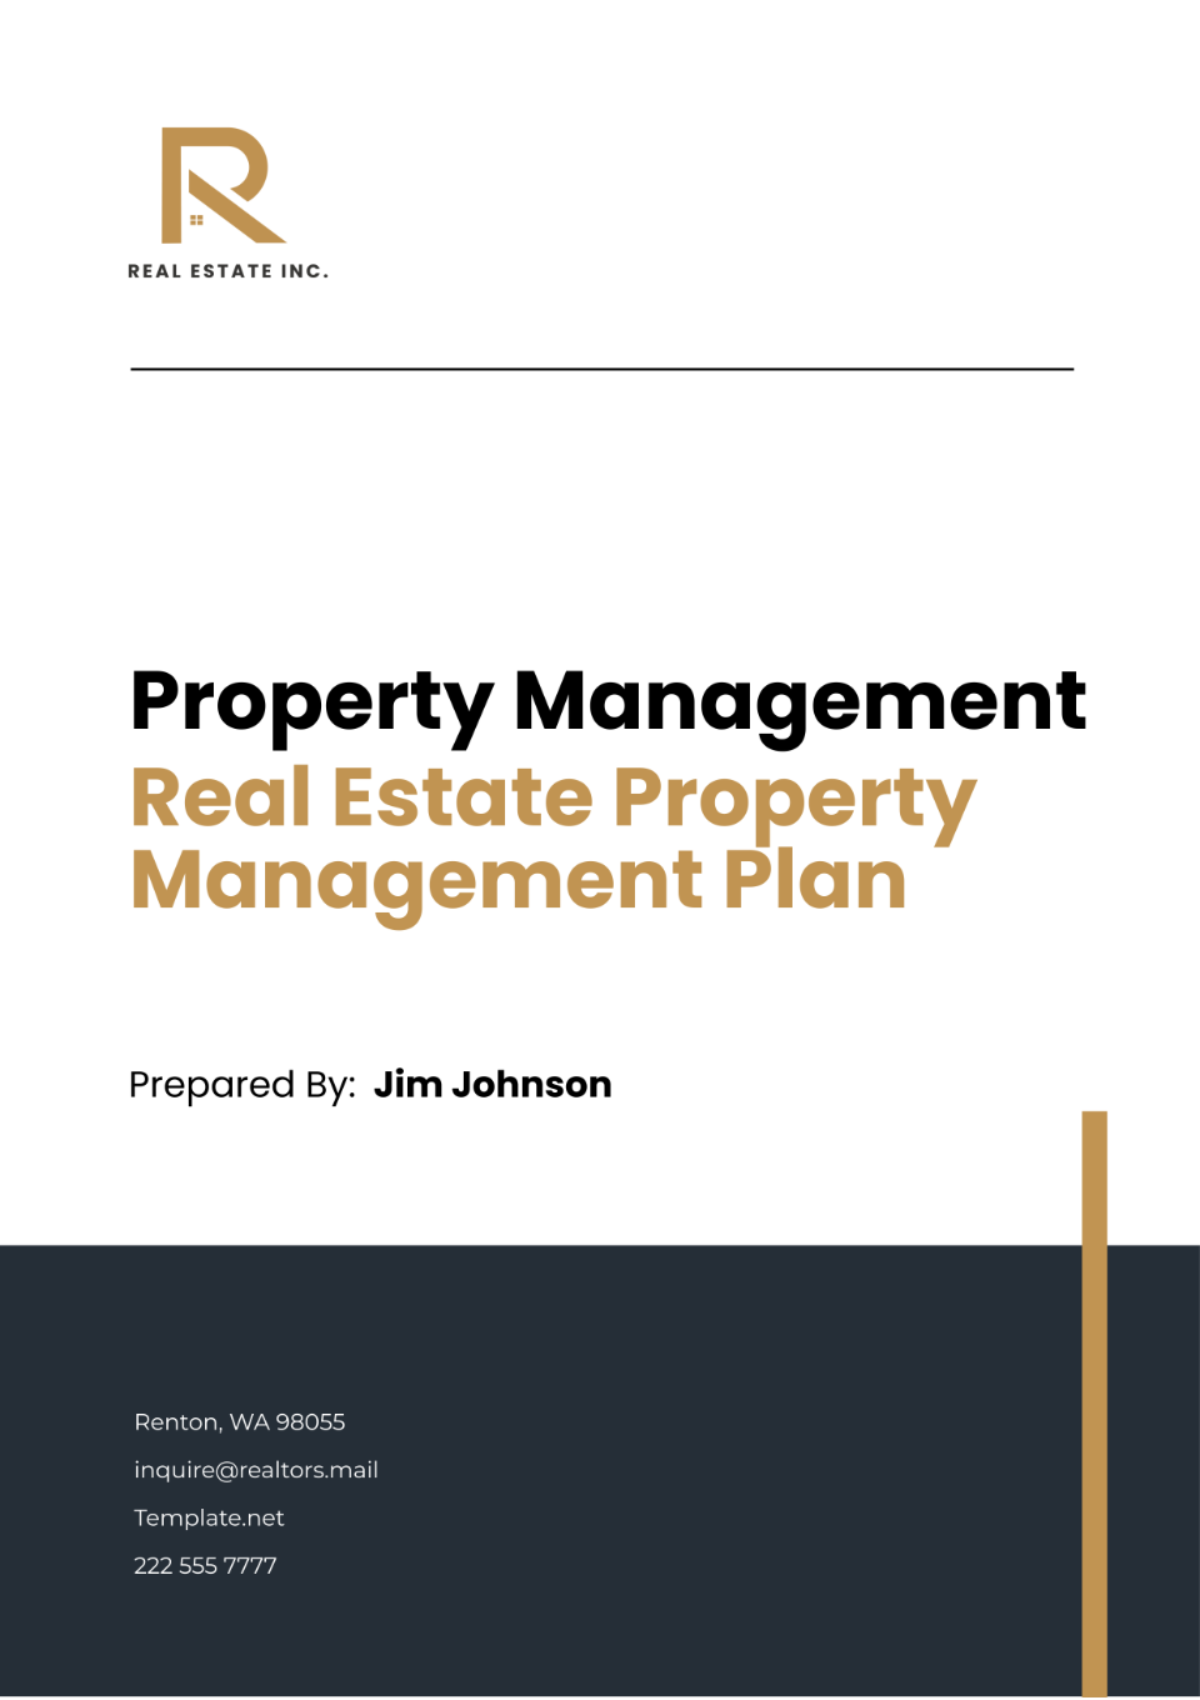 Real Estate Property Management Plan Template